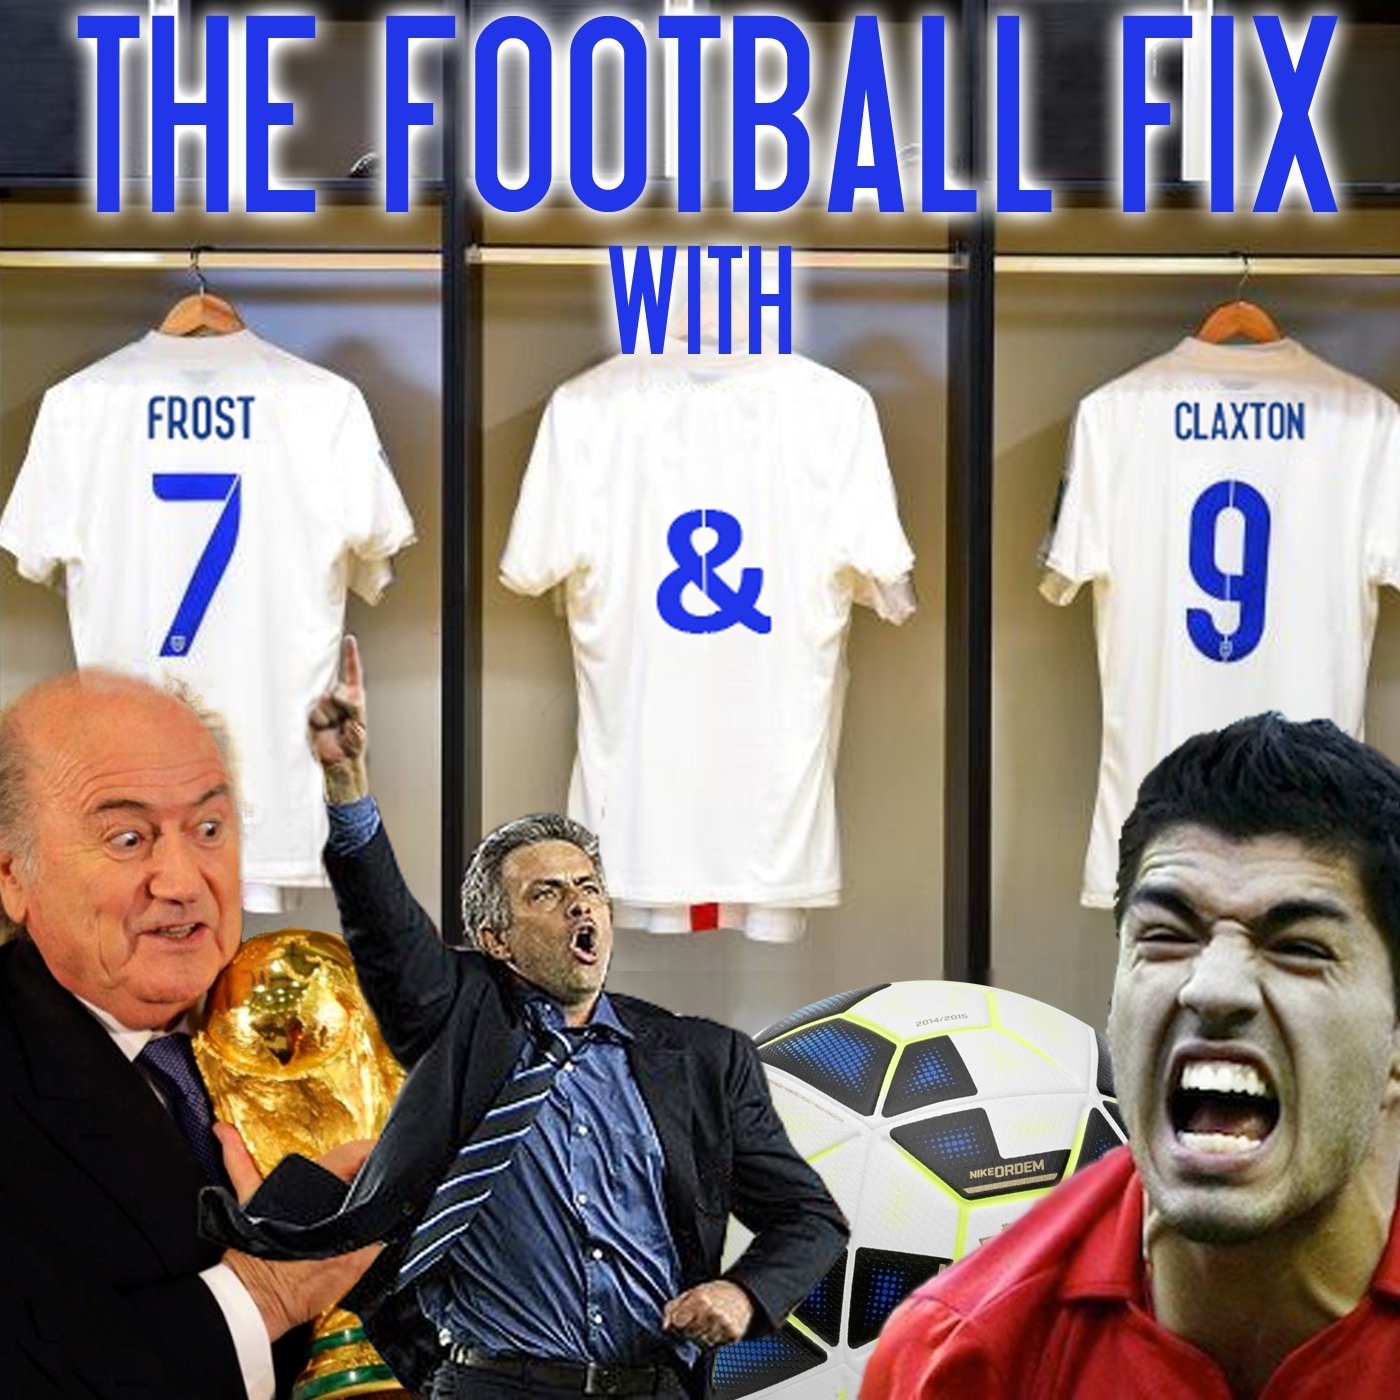 The Football Fix with Frost and Claxton